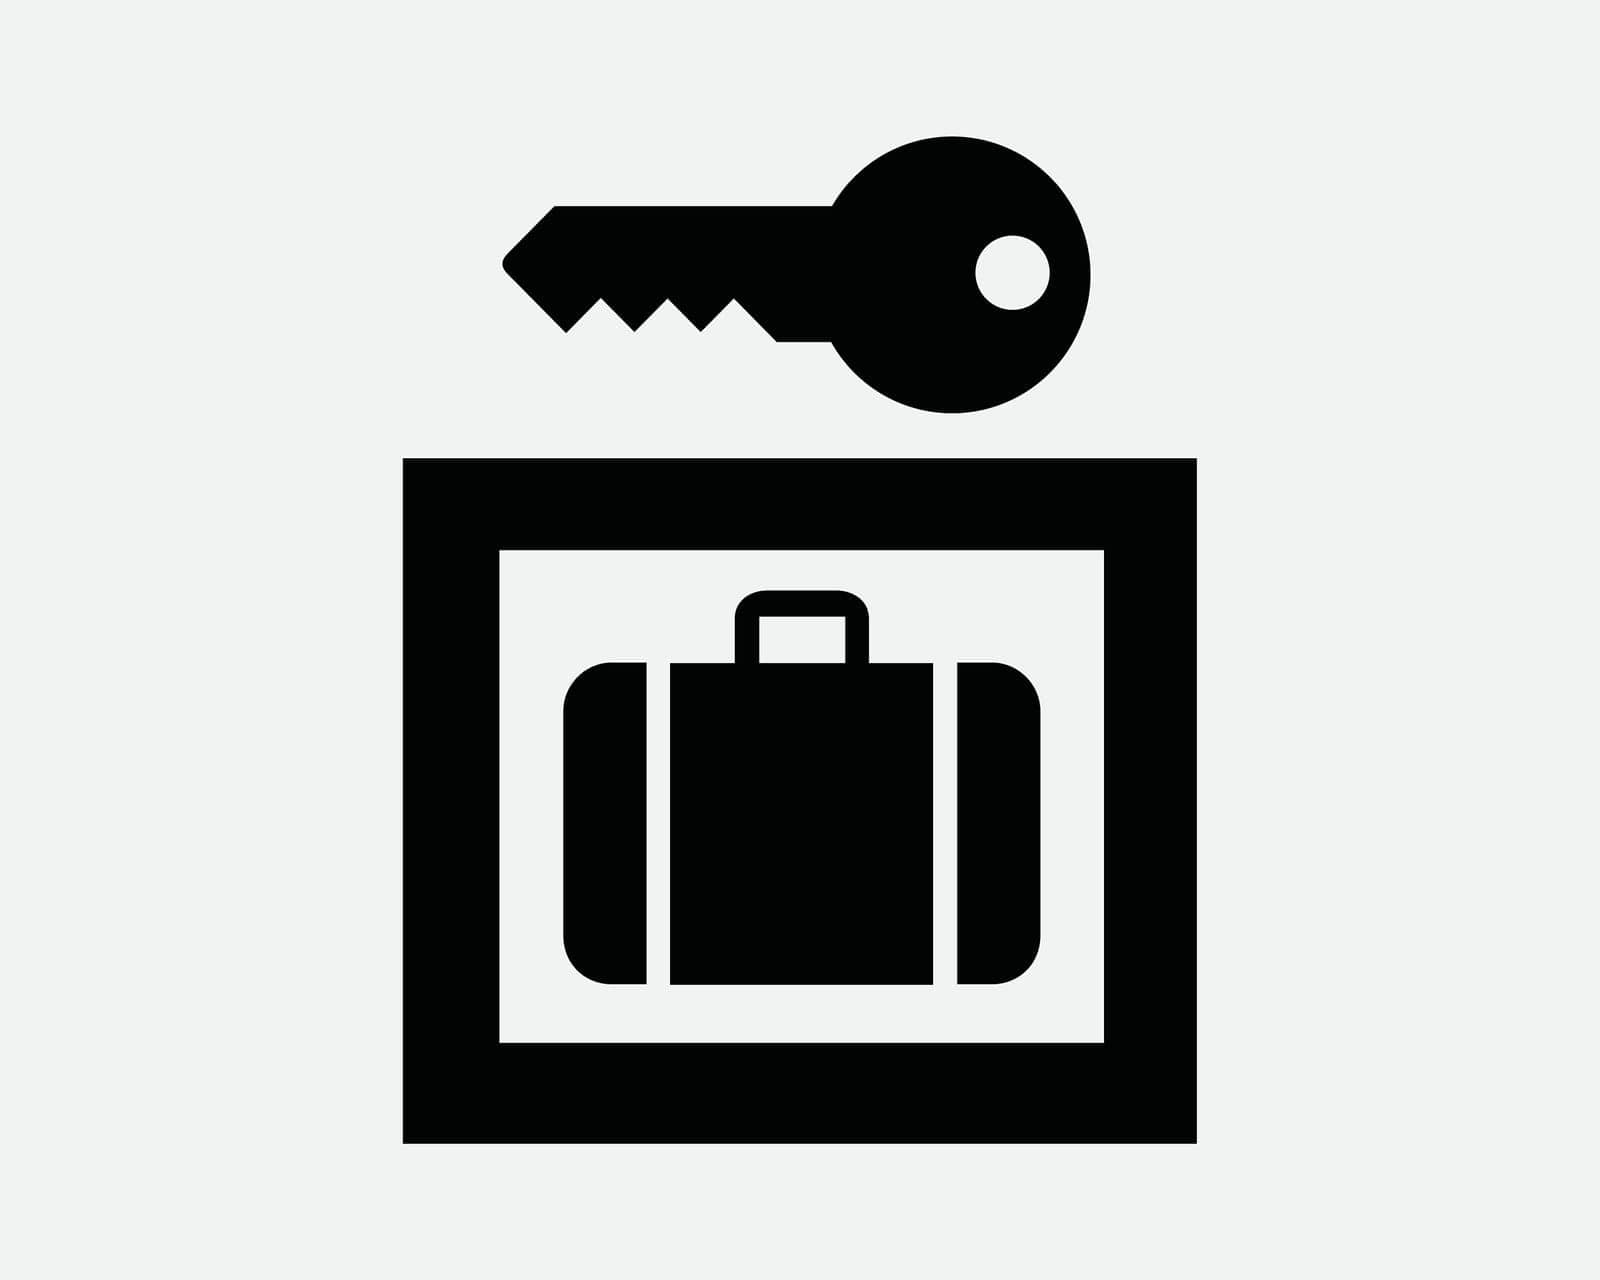 Luggage Locker Safe Icon. Baggage Suitcase Briefcase Safety Storage Lock Key Secure. Black White Sign Symbol Illustration Graphic Clipart EPS Vector